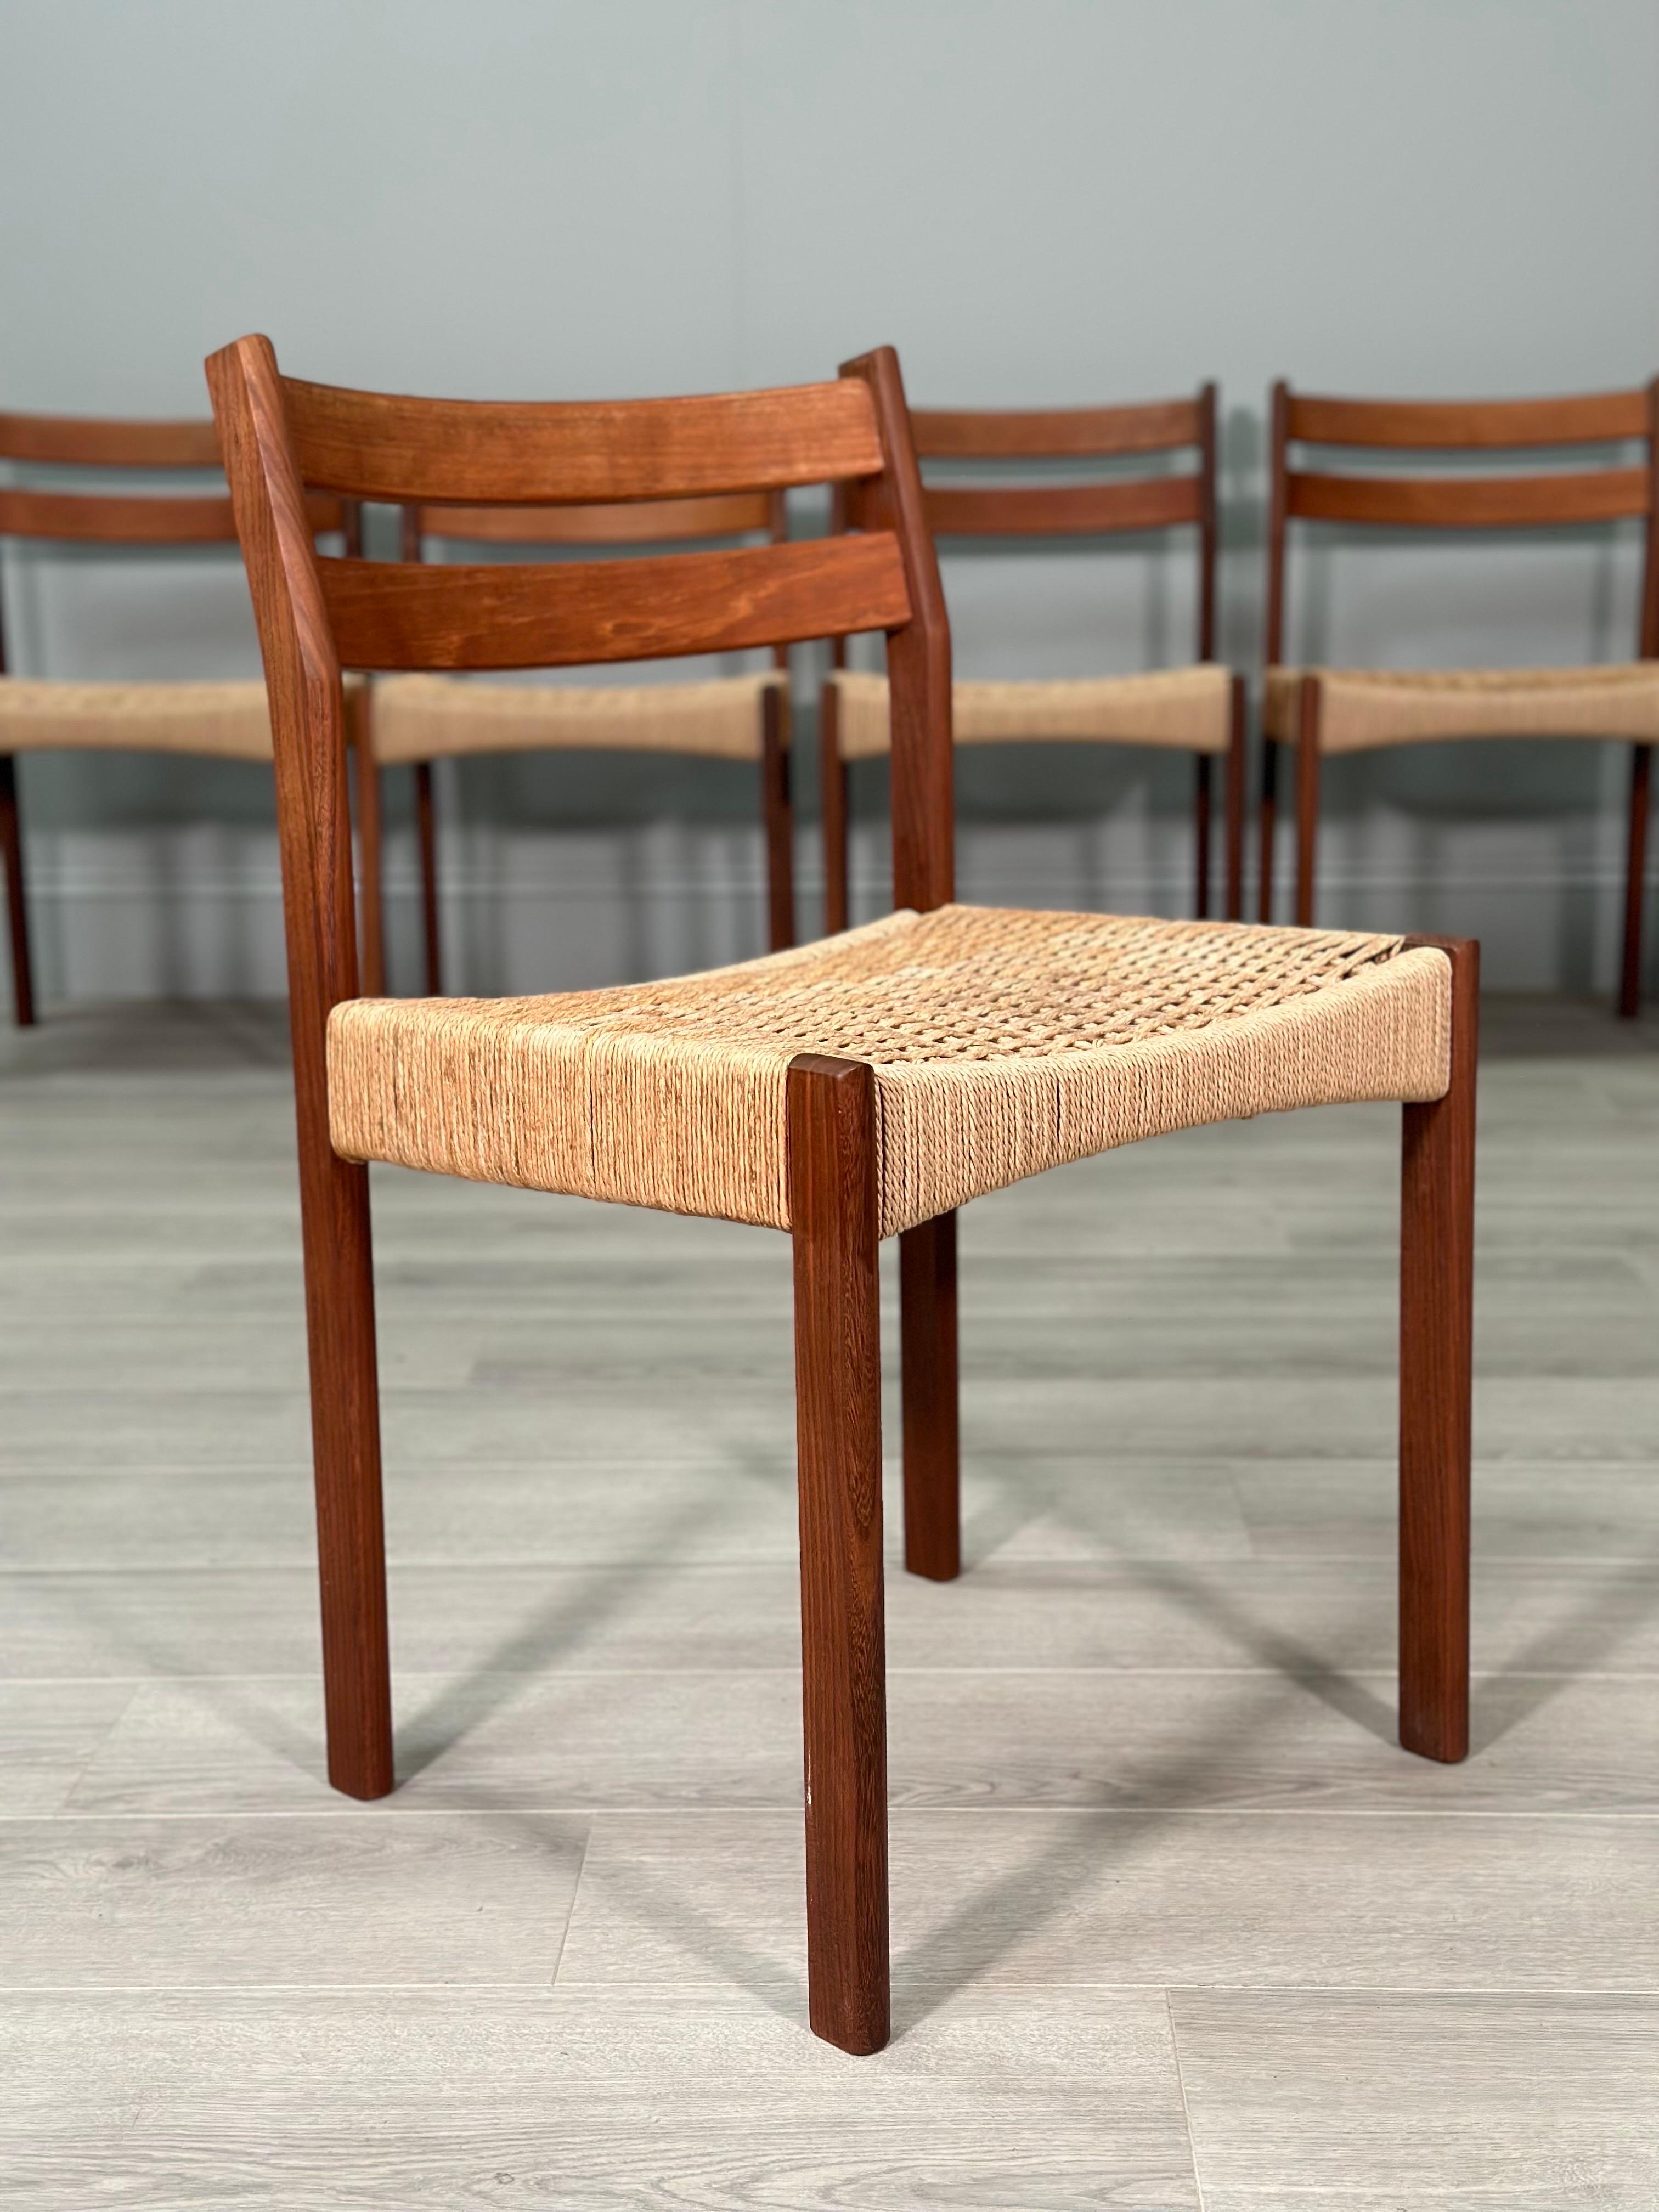 Hand-Crafted Set of 6 Danish Teak And Paper Cord Dining Chairs Designed By Arne Hovmand Olsen